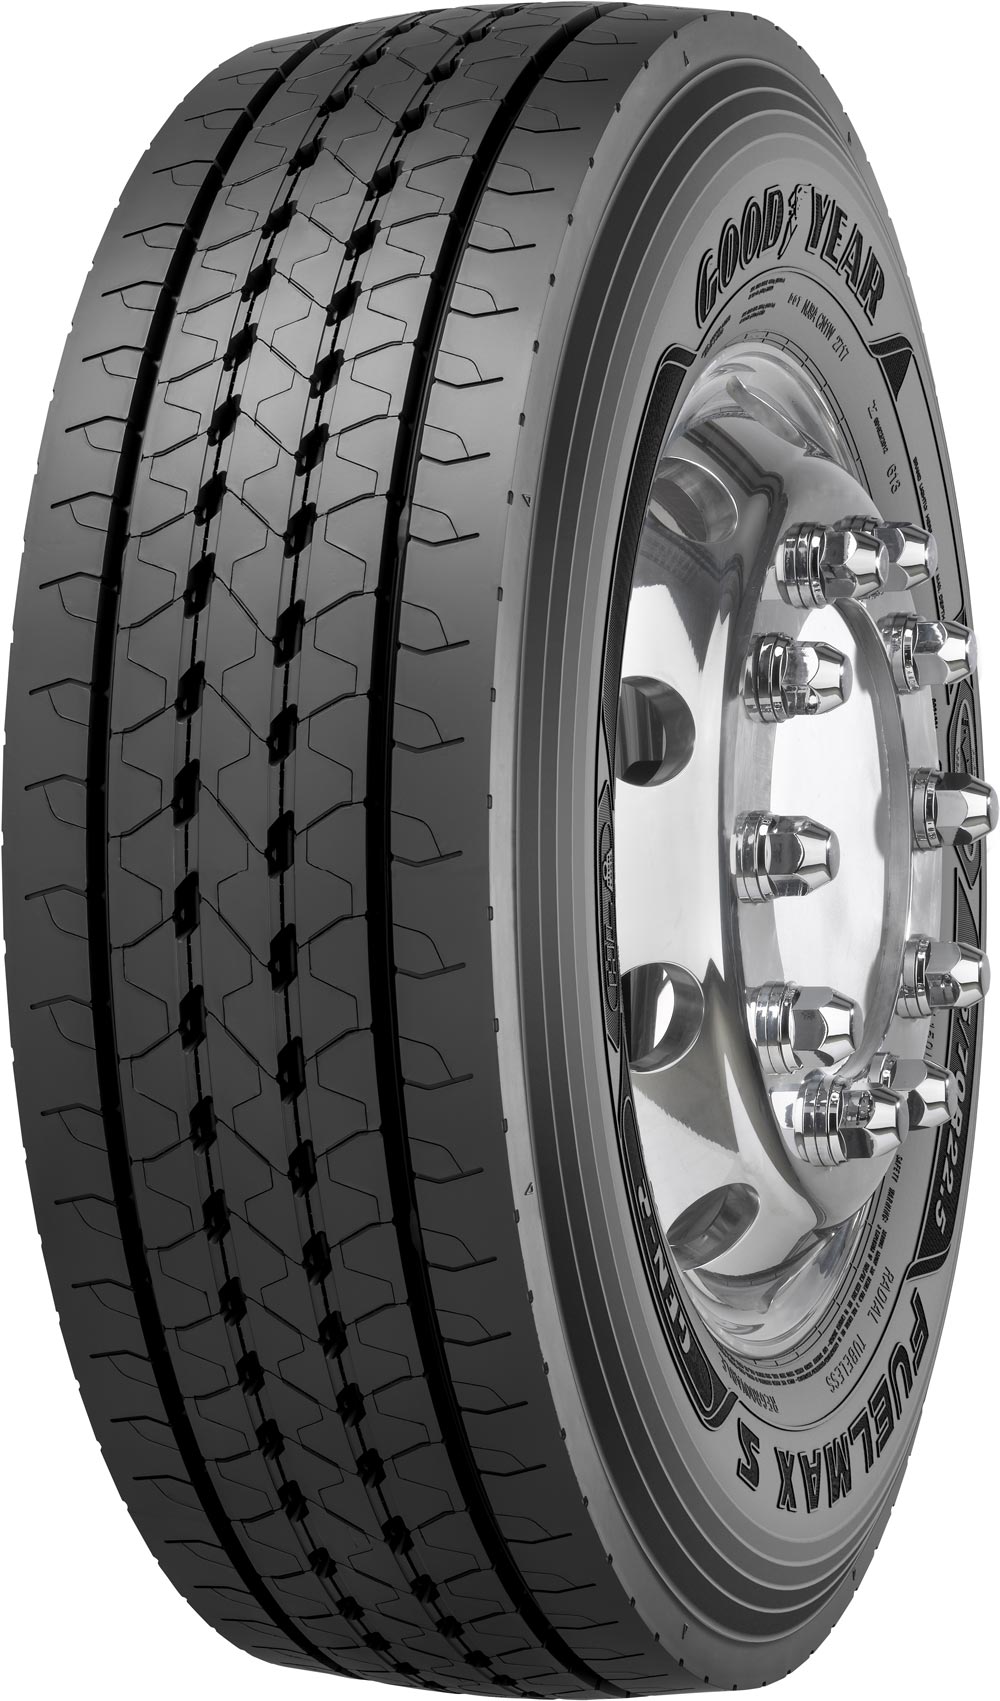 product_type-heavy_tires GOODYEAR FUELMAX S G2 20 TL 315/70 R22.5 156L